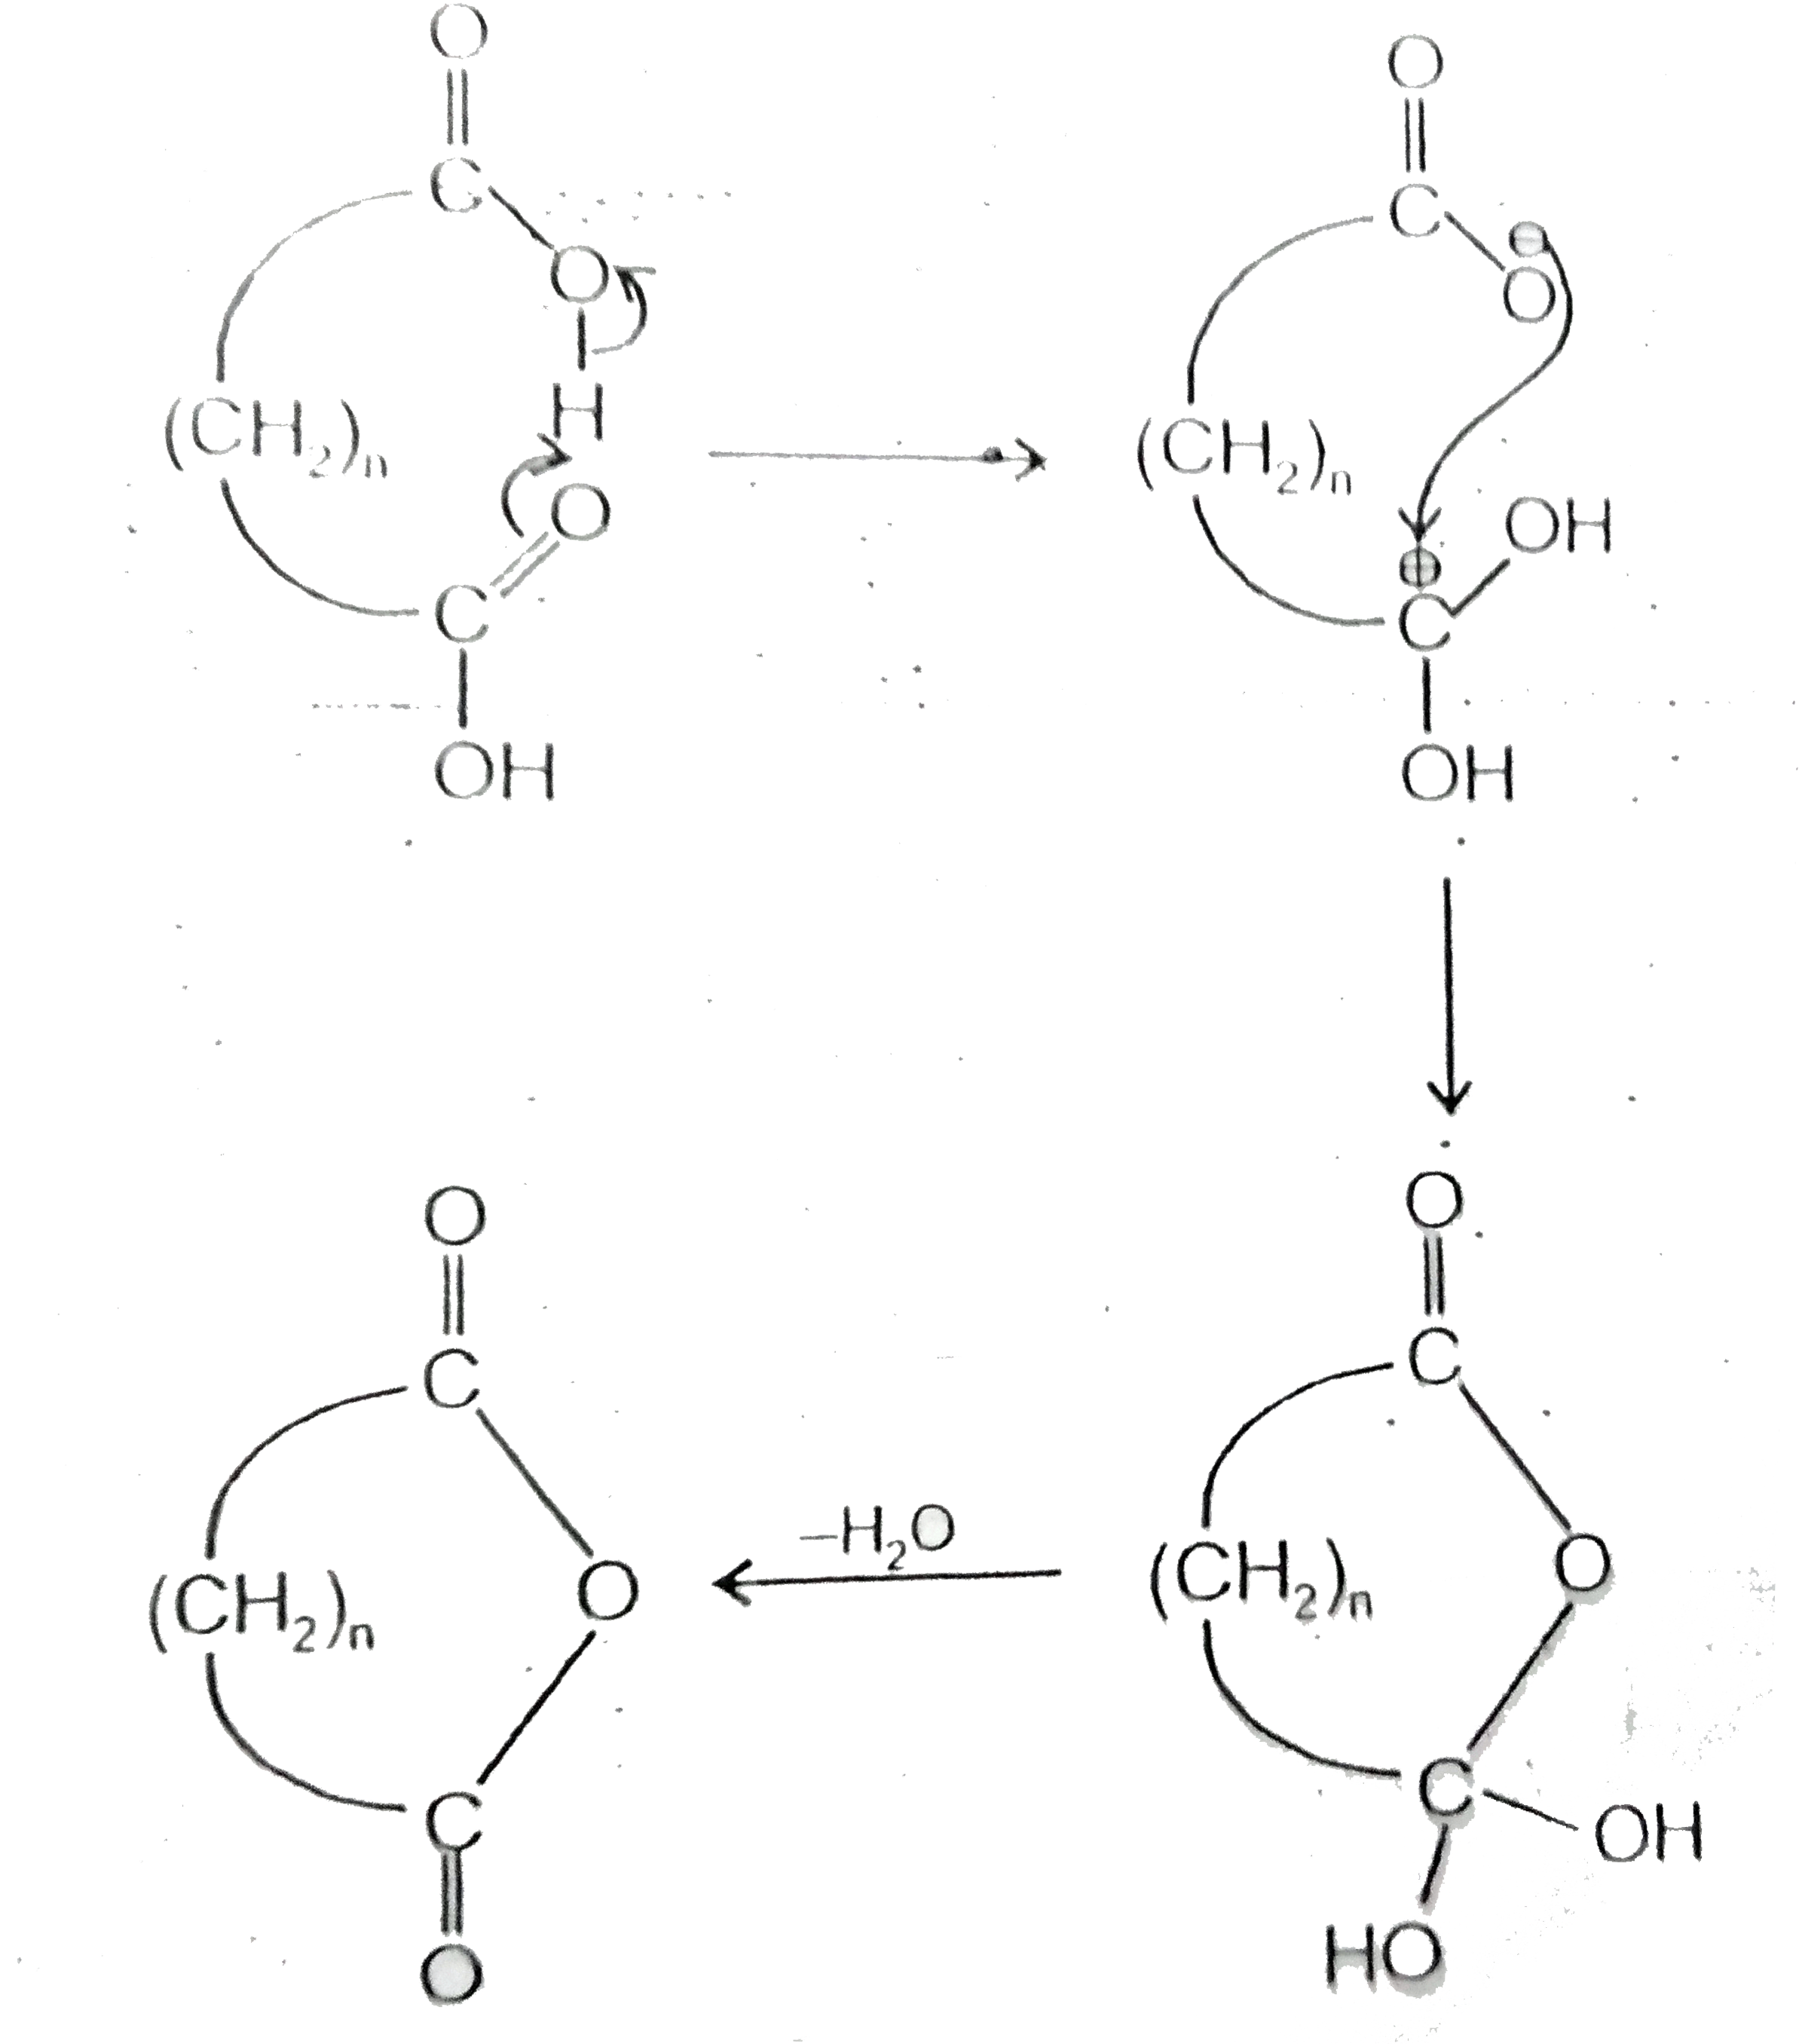 Certain  dicarboxylic acids spontaneously eliminate water when heated forming cycioc anhydirides. But for the reaction to be successfully. The cyclic anhydrides product must normally have a ring size of fivee or six members. There are two important reasons, first, the second carboxyl group can serve as the acid catalyst (by intramolecular proton transfer), as well as the nucleophile. And second, the high temperature involved reduce the need for catalyst.      Which of the following dicarboxylic acid will not for cyclic anhydrides?